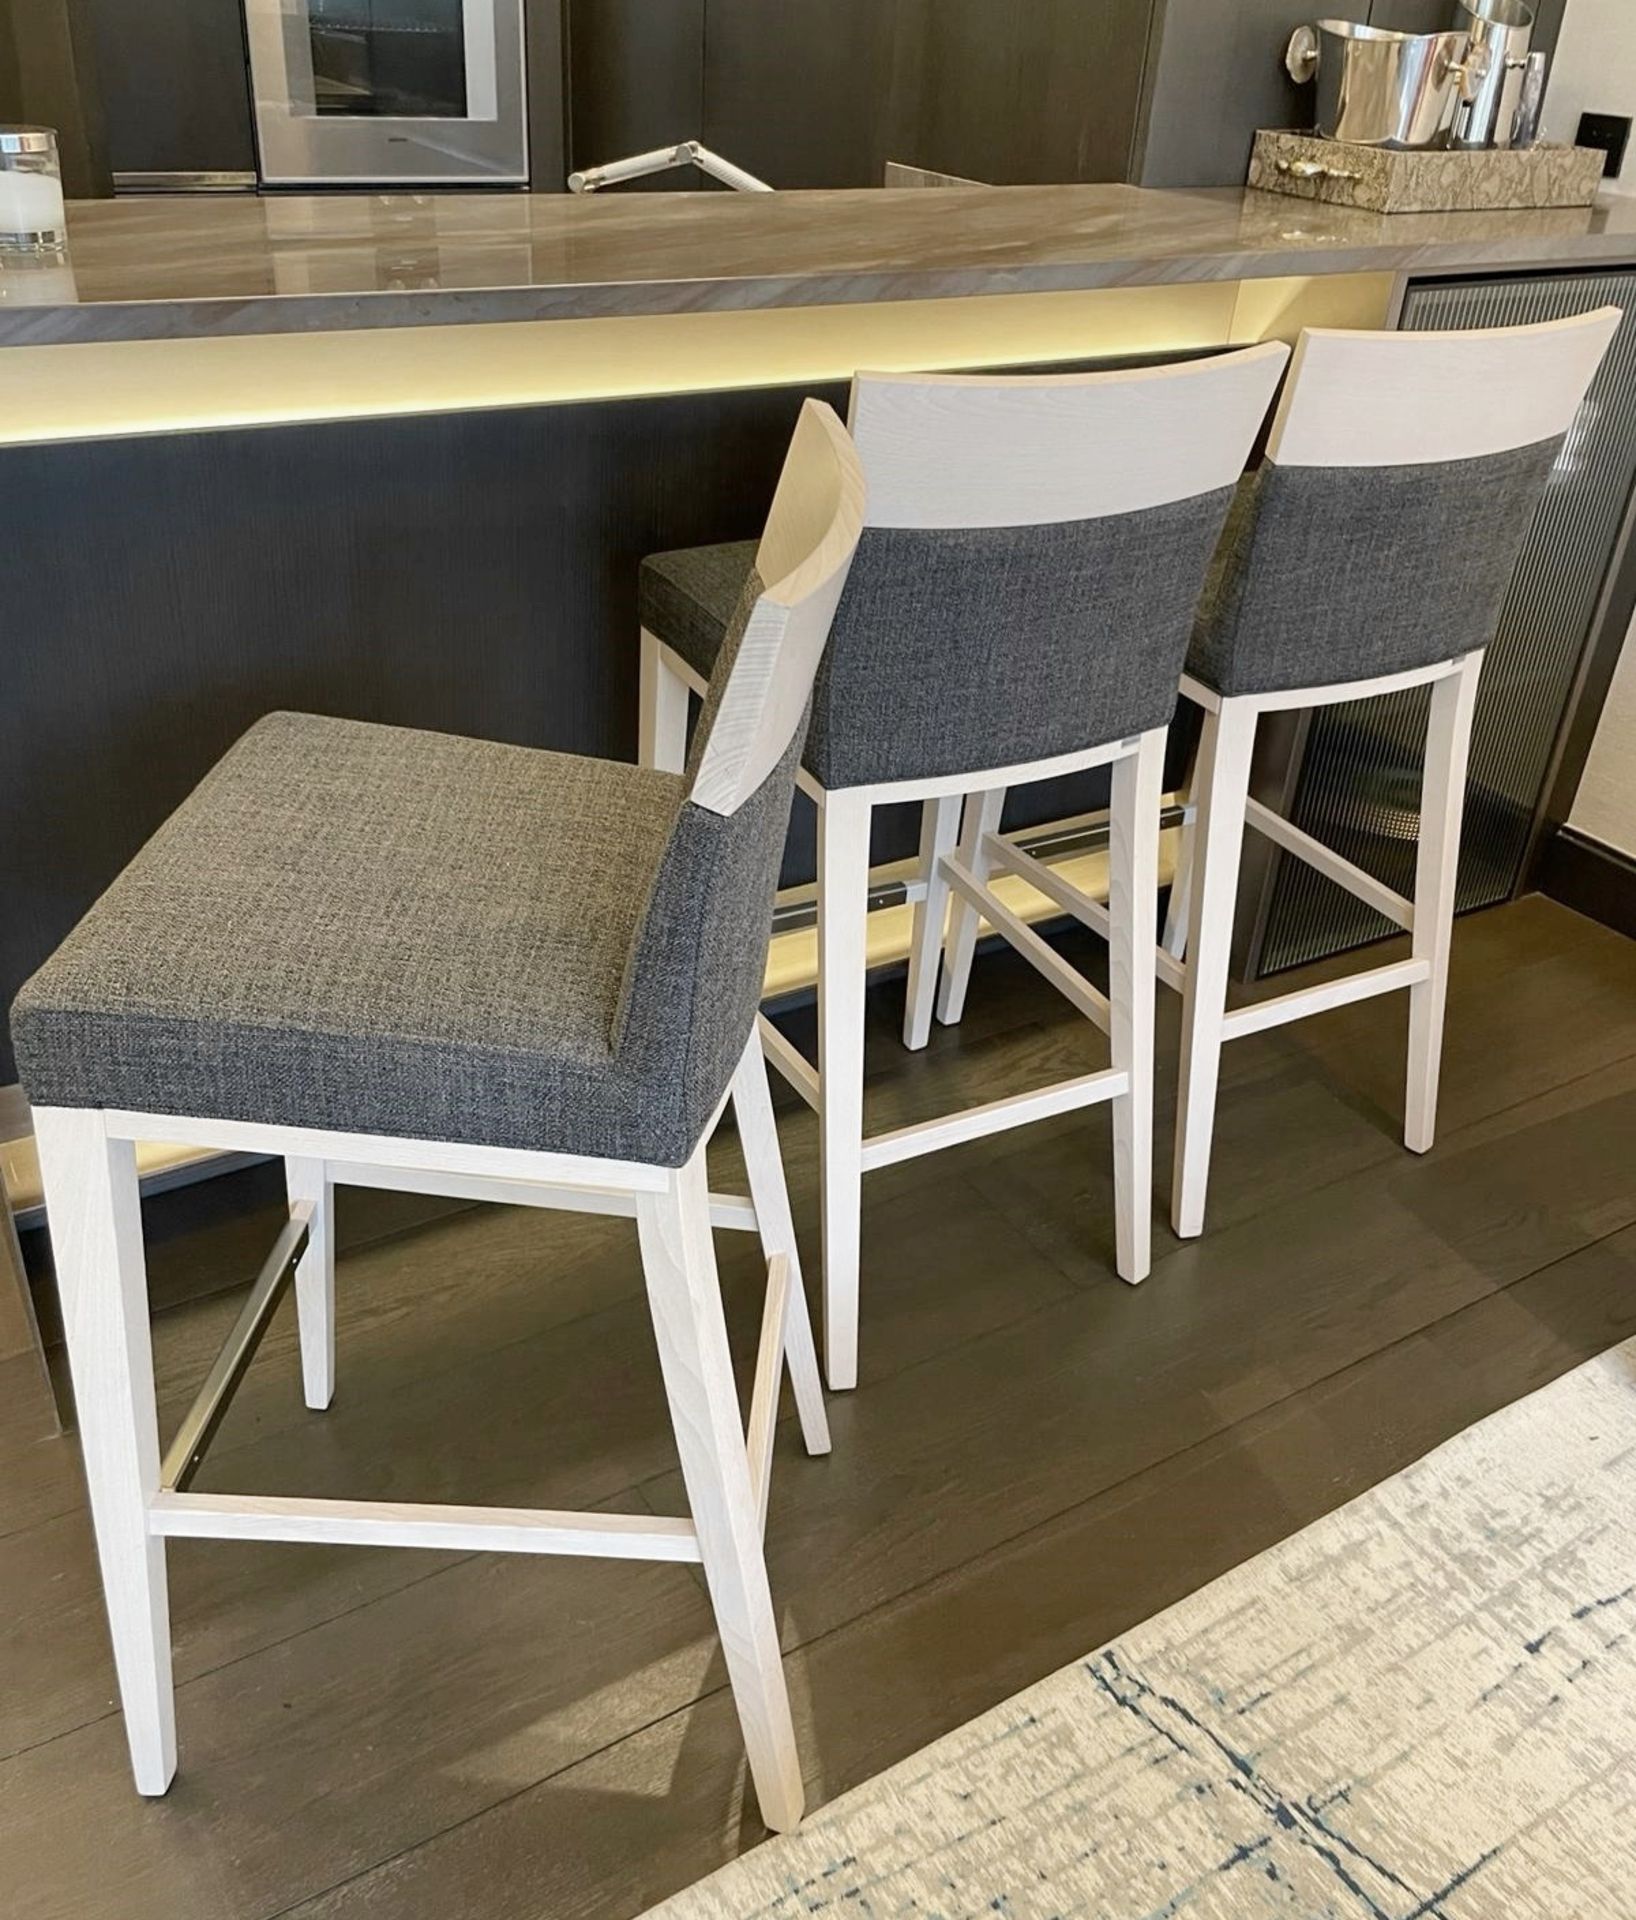 3 x MONTBEL Designer Bar Stools With Light Stained Frames And Grey Fabric Upholstery - Image 3 of 18